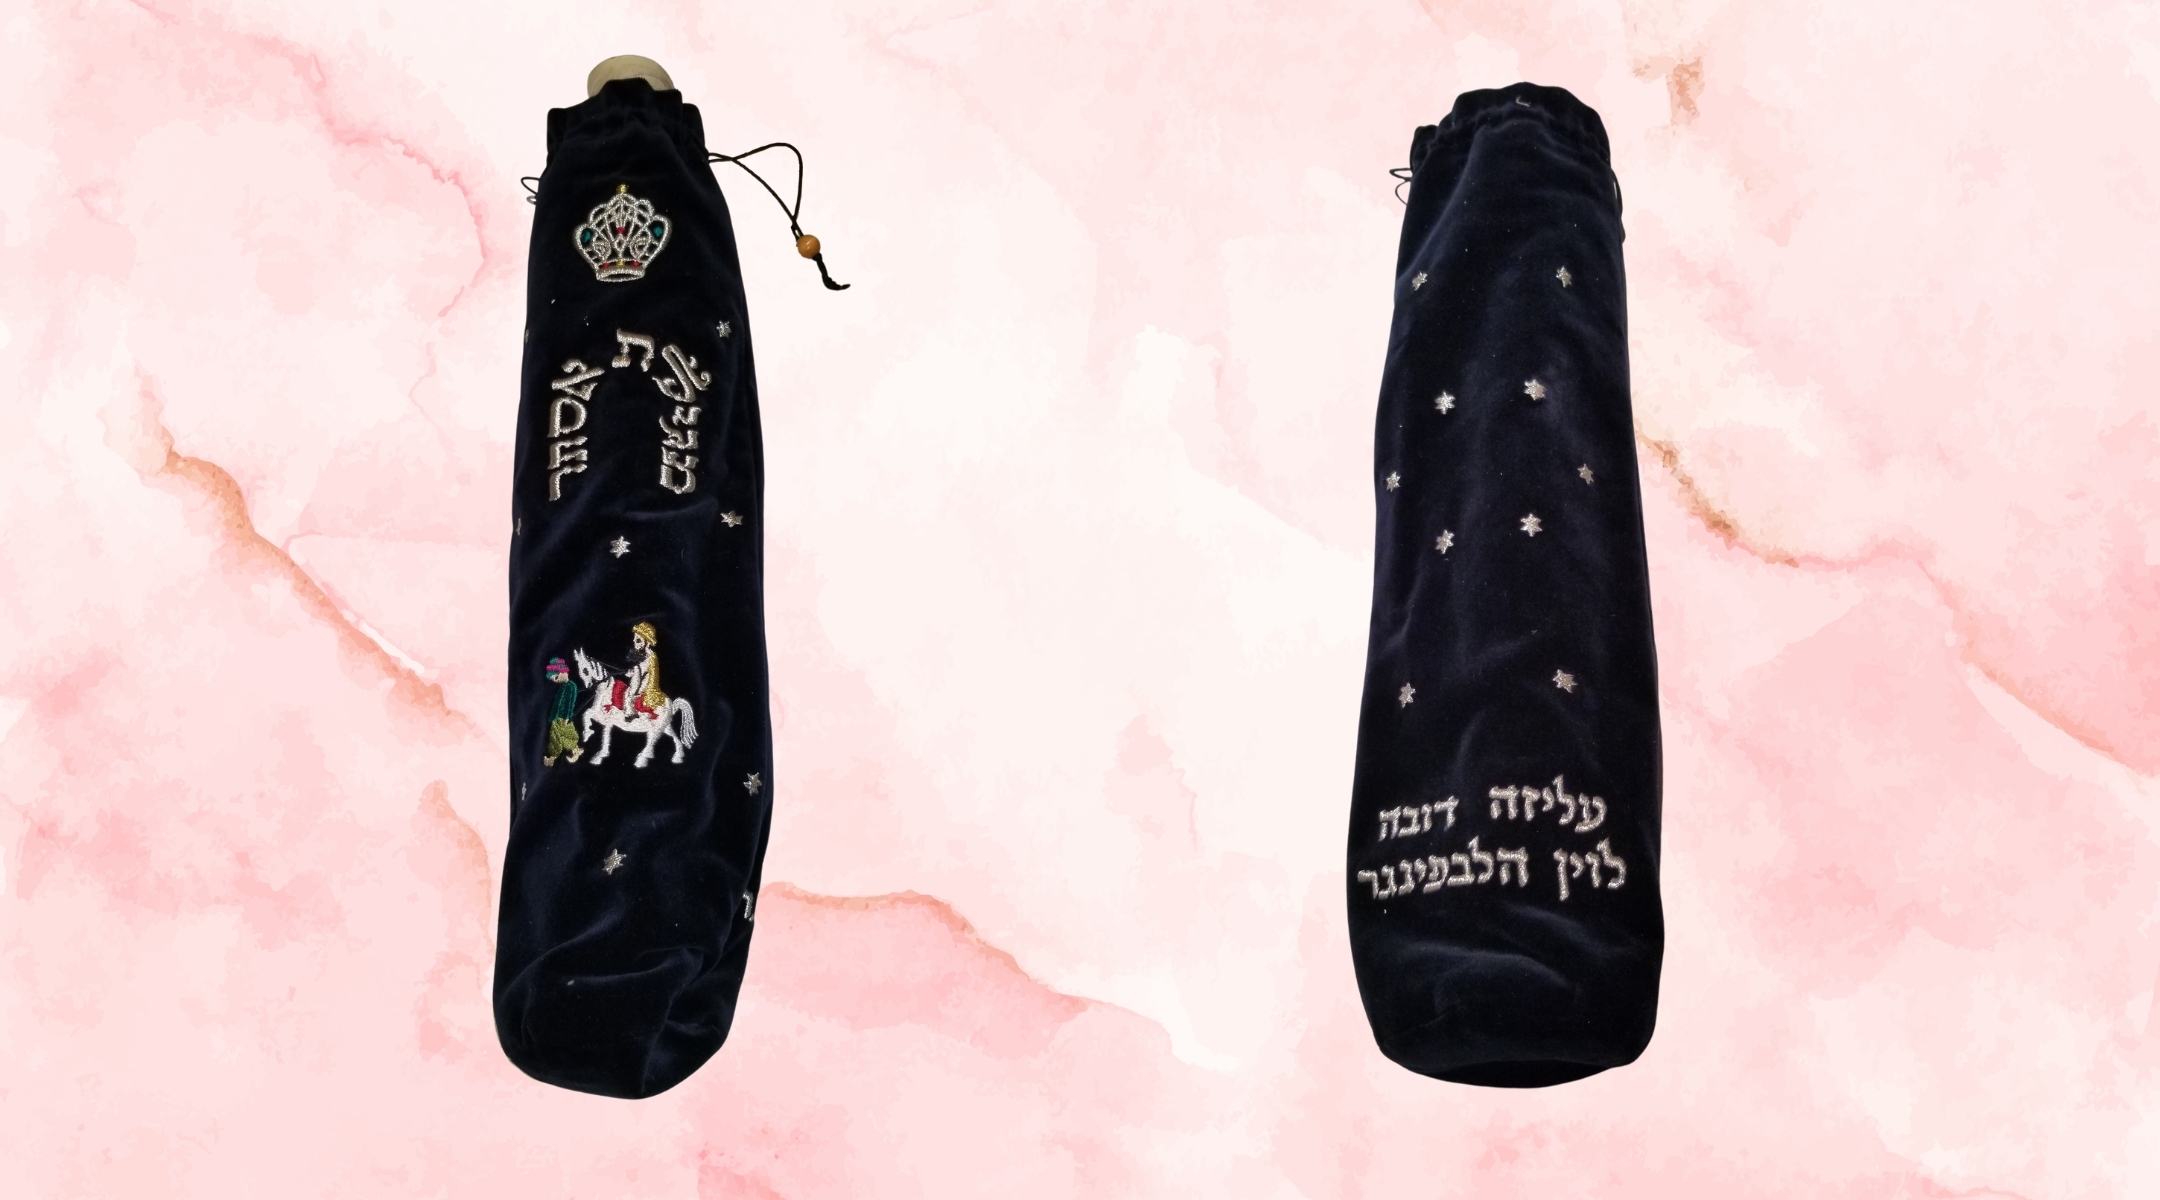 Alyza Lewin’s personal megillah scroll cover is embroidered with an image of Mordecai being led on a horse by Haman on one side, and her name on the other side. (Photos courtesy of Alyza Lewin. Design by Jackie Hajdenberg)